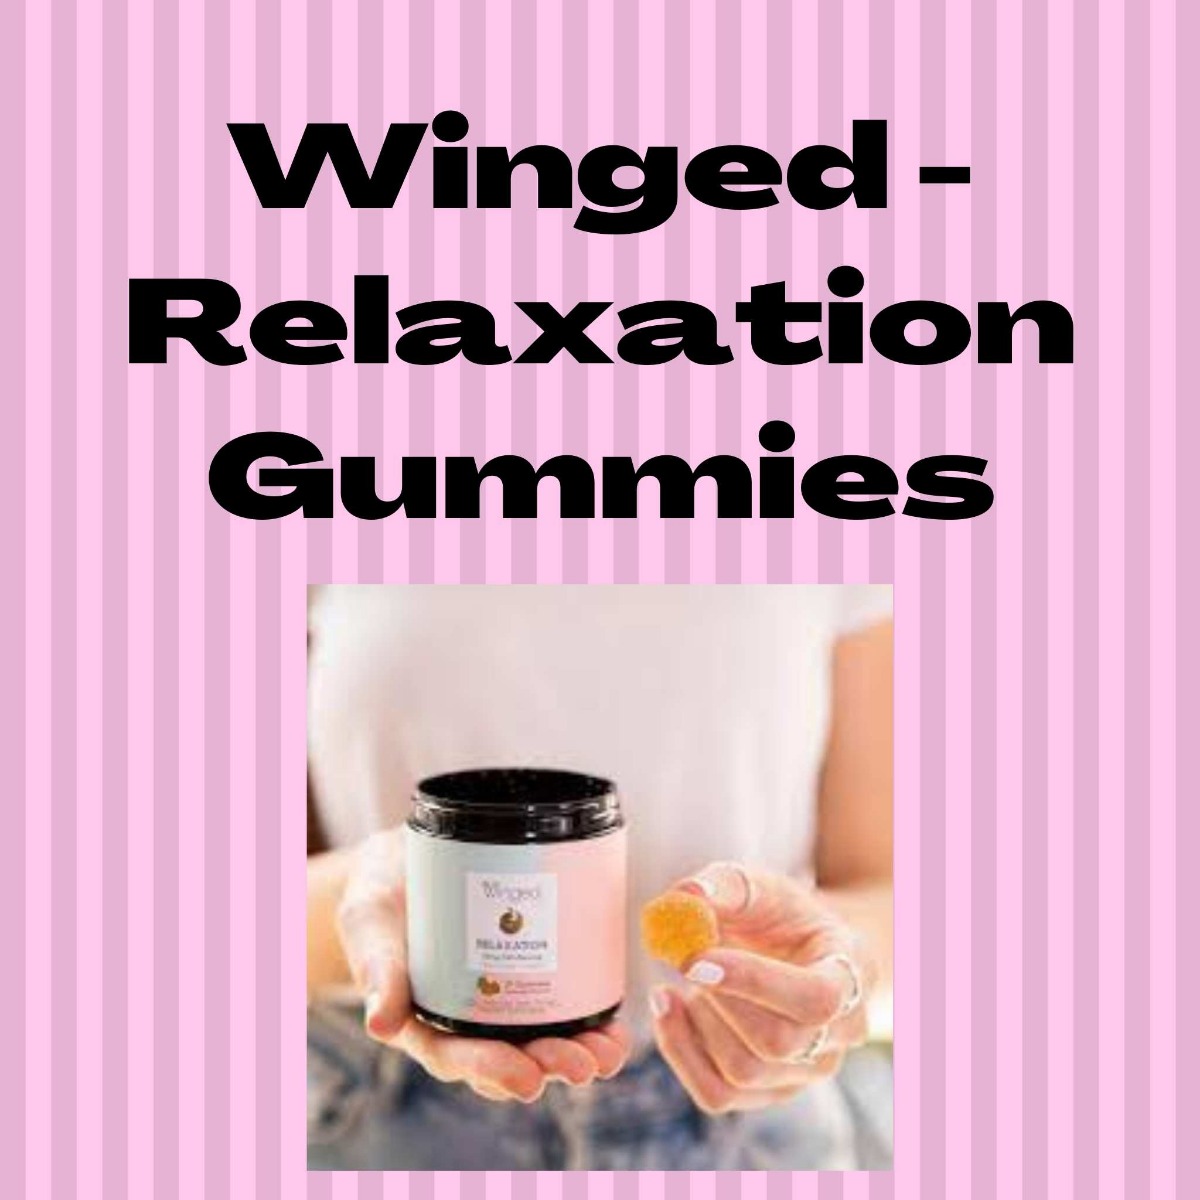 Winged - Relaxation Gummies being held in the hands with a pink background 